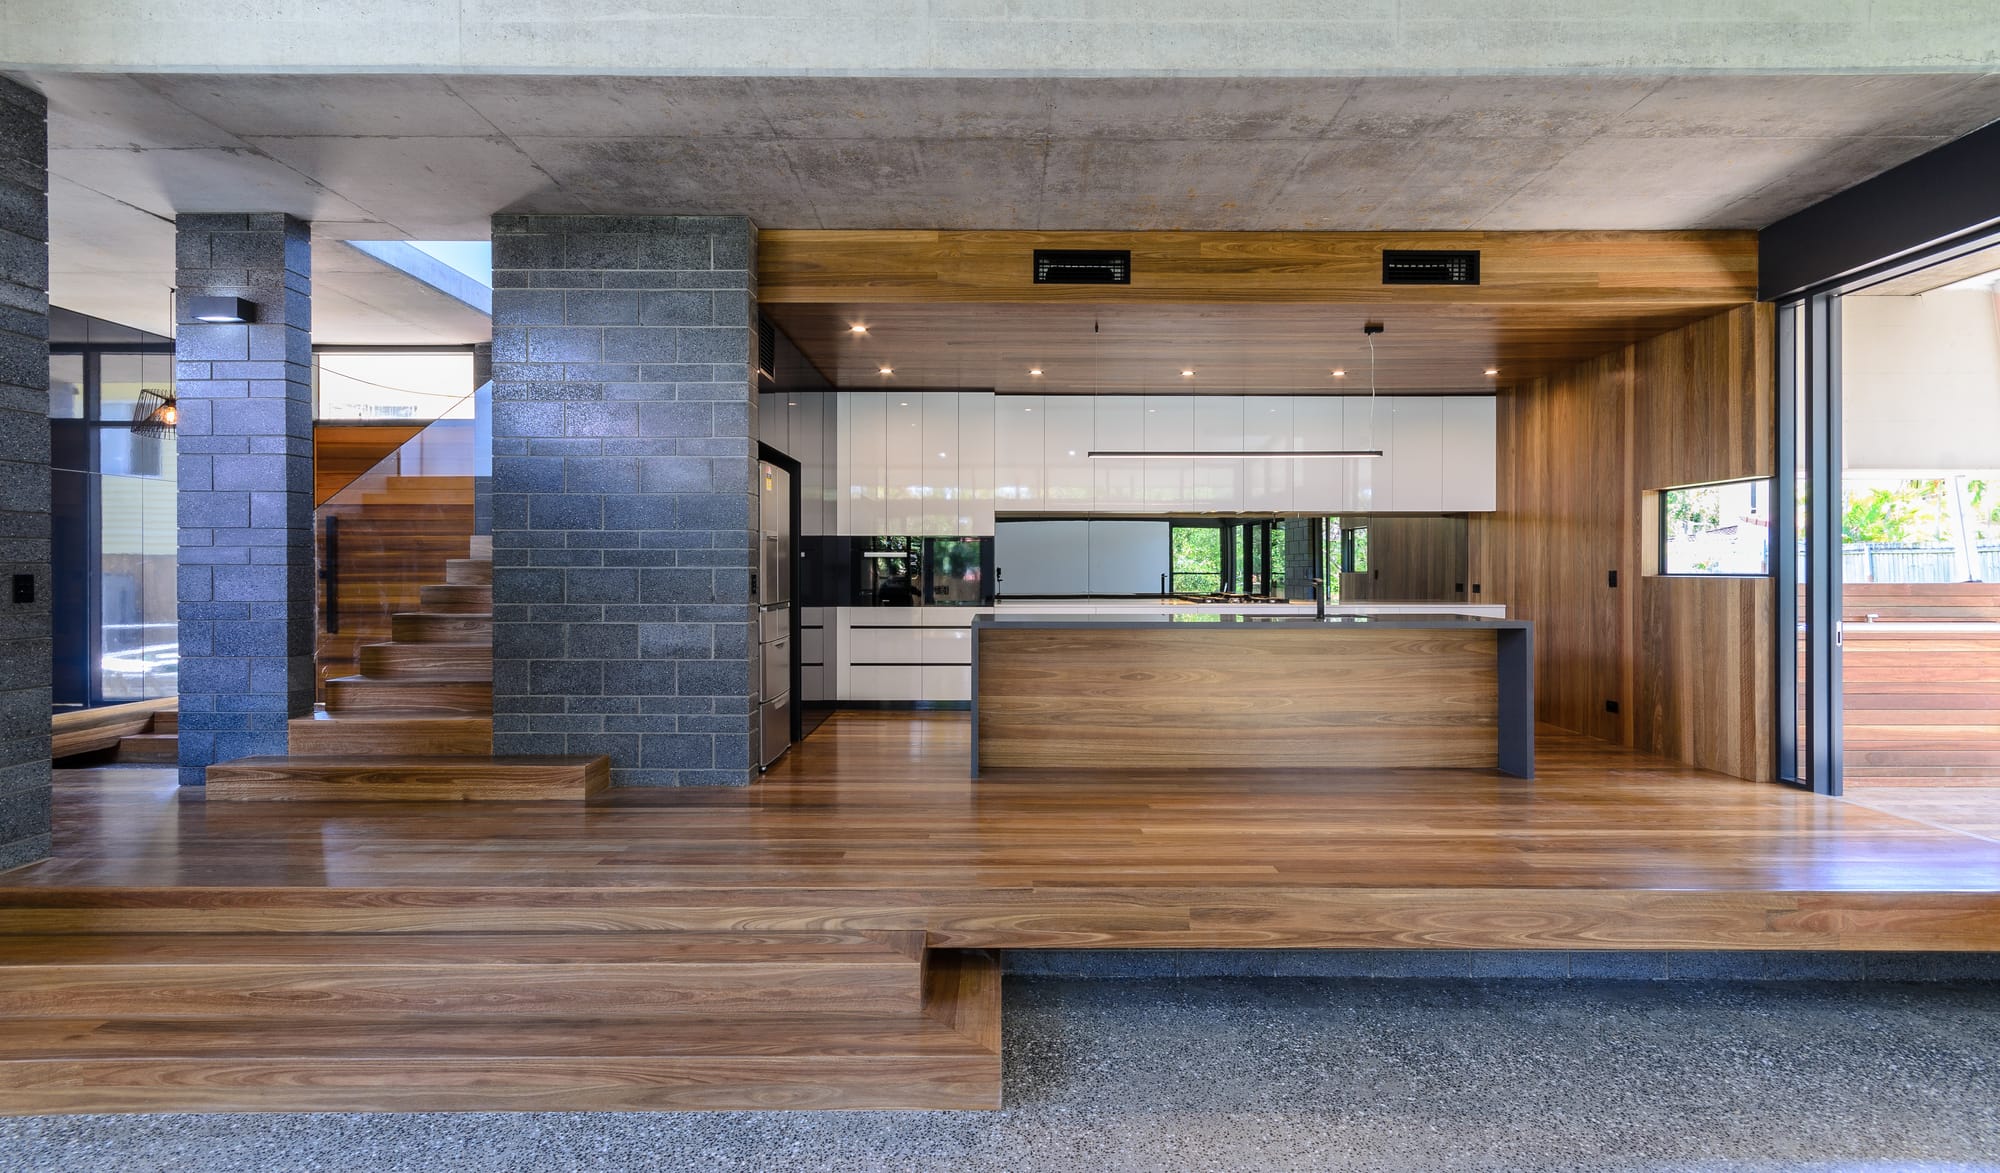 B Residence by 77 Architecture. Copyright of 77 Architecture. Ladnscape image of residential kitchen with elevated timber flooring, walls, ceiling and cabinetry. Dark brick.